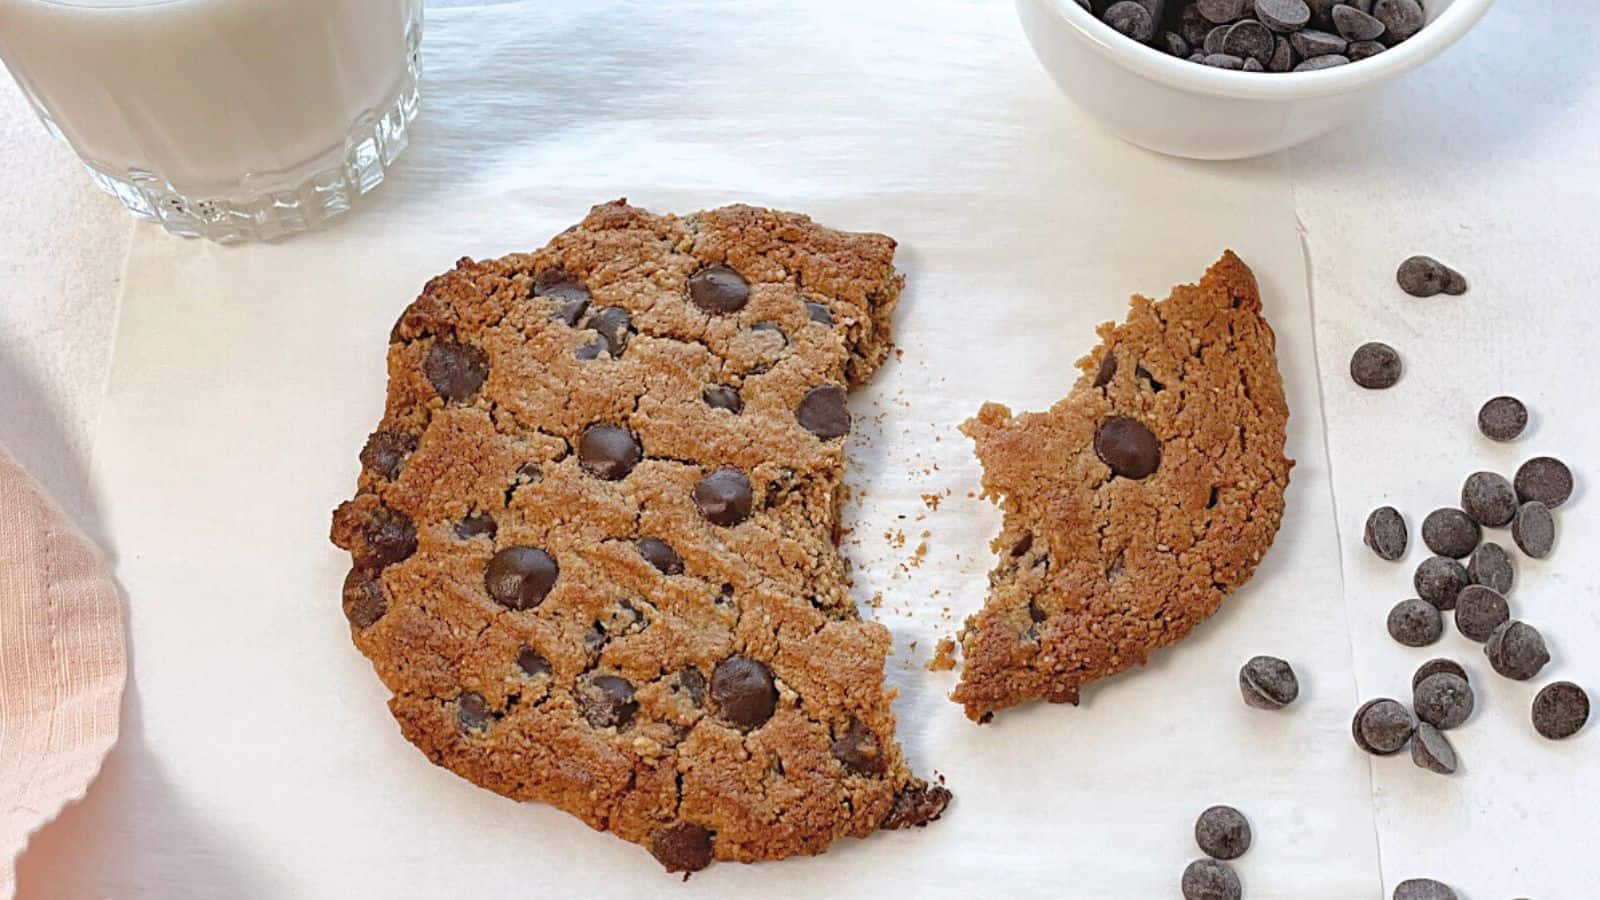 <p>Treat yourself to a healthier twist on a classic favorite with this single-serve chocolate chip cookie recipe. Providing an effortless chocolate fix, it’s made with wholesome ingredients and bakes in minutes for a warm and satisfying treat. Perfect for satisfying cravings without overindulging, it’s a guilt-free dessert option.<br><strong>Get the Recipe: </strong><a href="https://littlebitrecipes.com/single-serve-cookie-vegan/?utm_source=msn&utm_medium=page&utm_campaign=msn">Healthier Single-Serve Chocolate Chip Cookie</a></p>